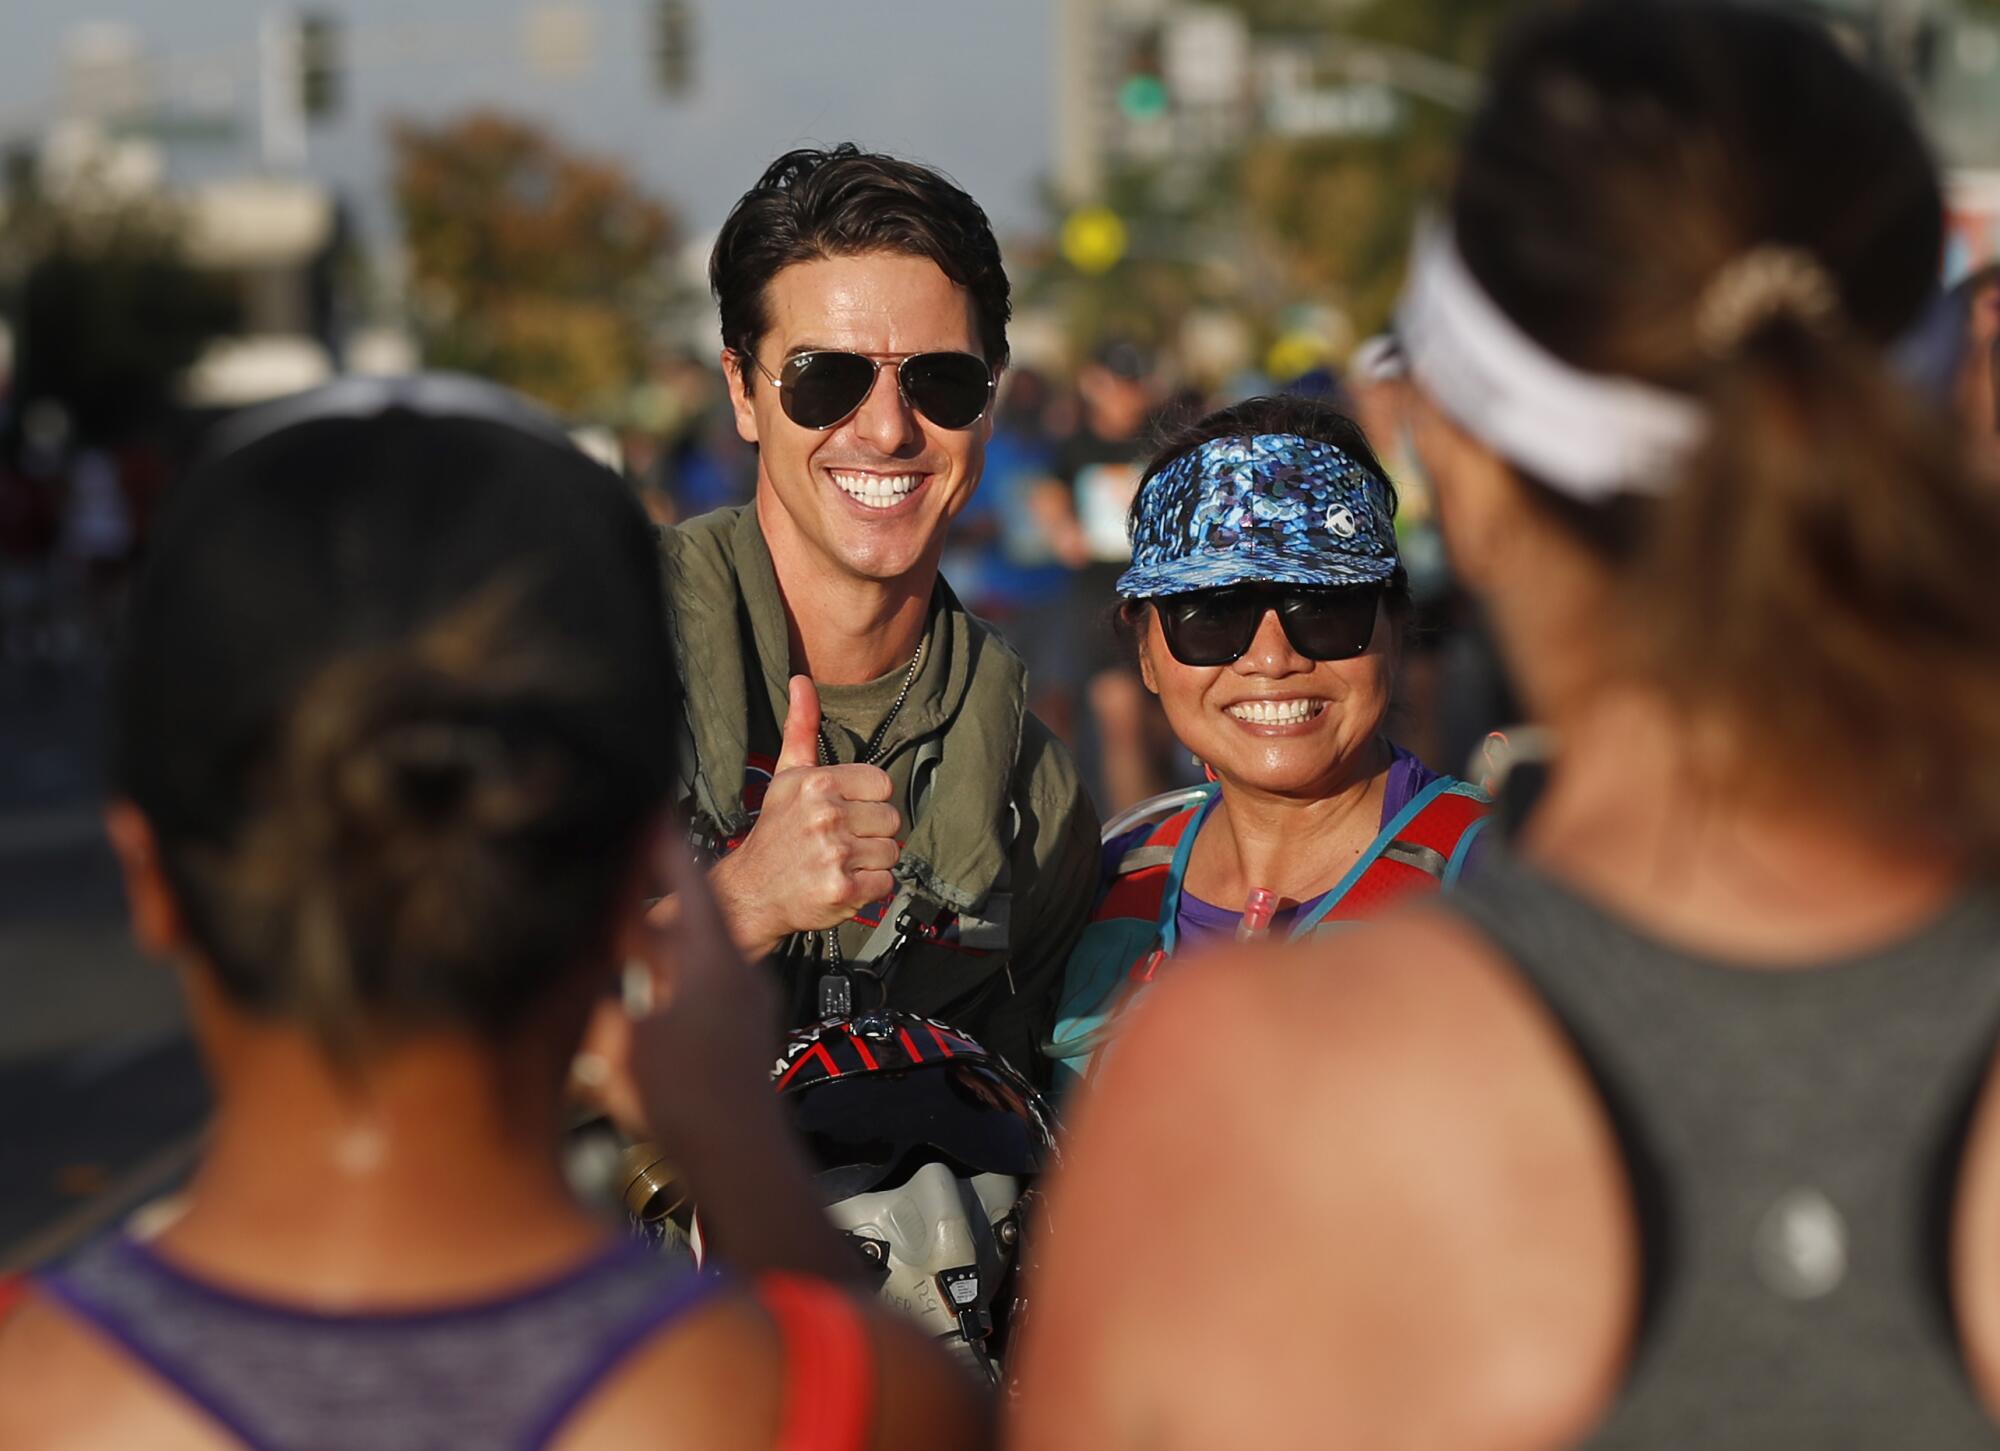 Jerome LeBlanc, dressed as Tom Cruise's character Maverick from Top Gun, entertains runners in North Park